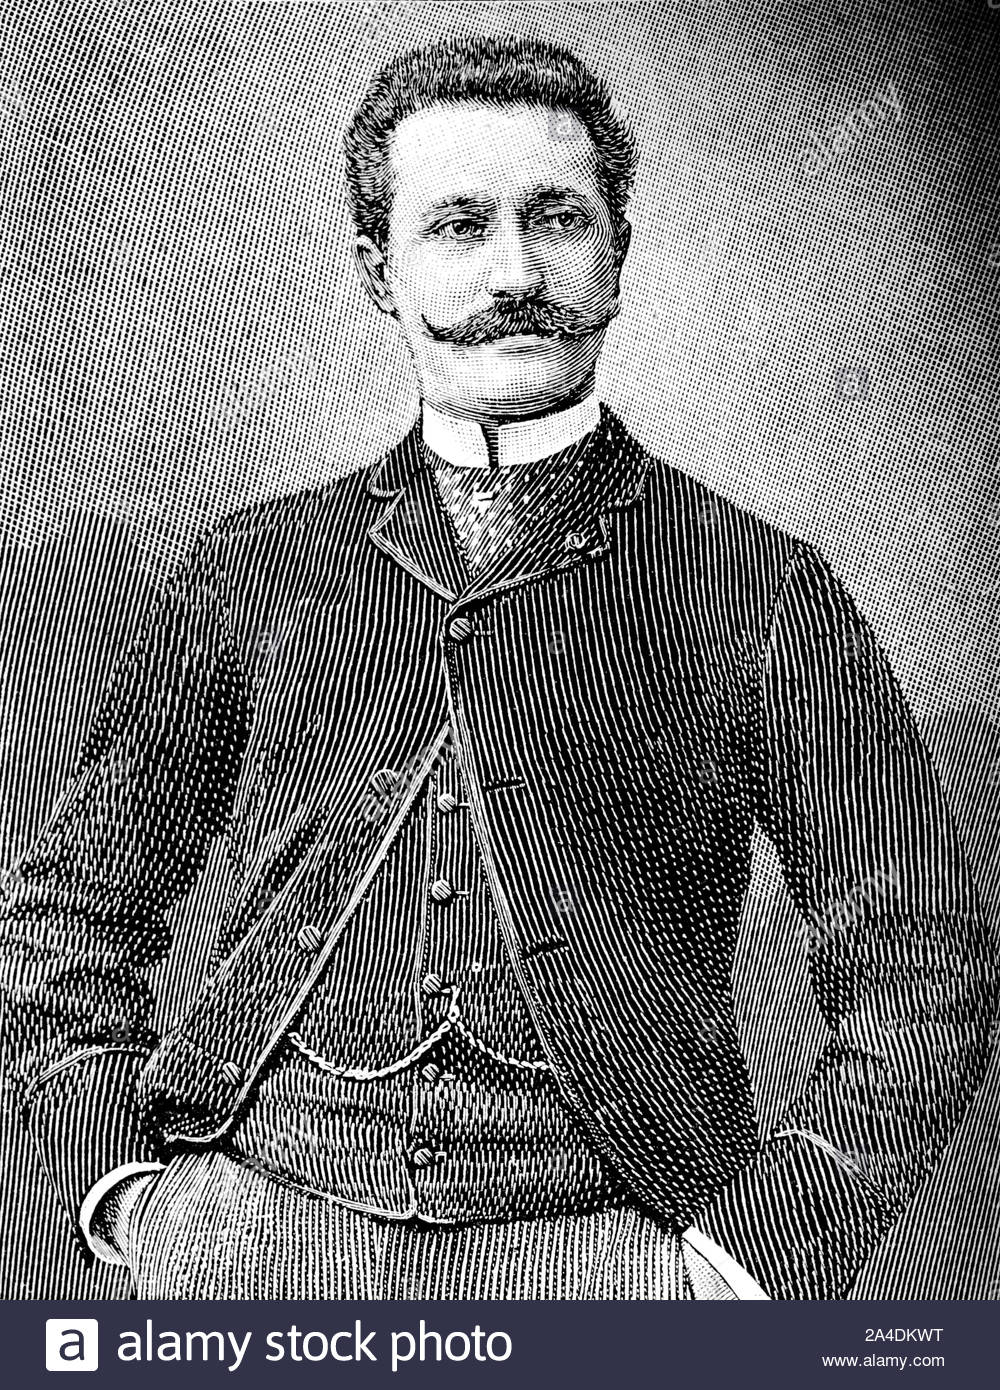 Jean-Baptiste Édouard Detaille portrait, 1848 – 1912,  was a French painter and military artist, vintage illustration from 1895. Shown here aged 40. Stock Photo